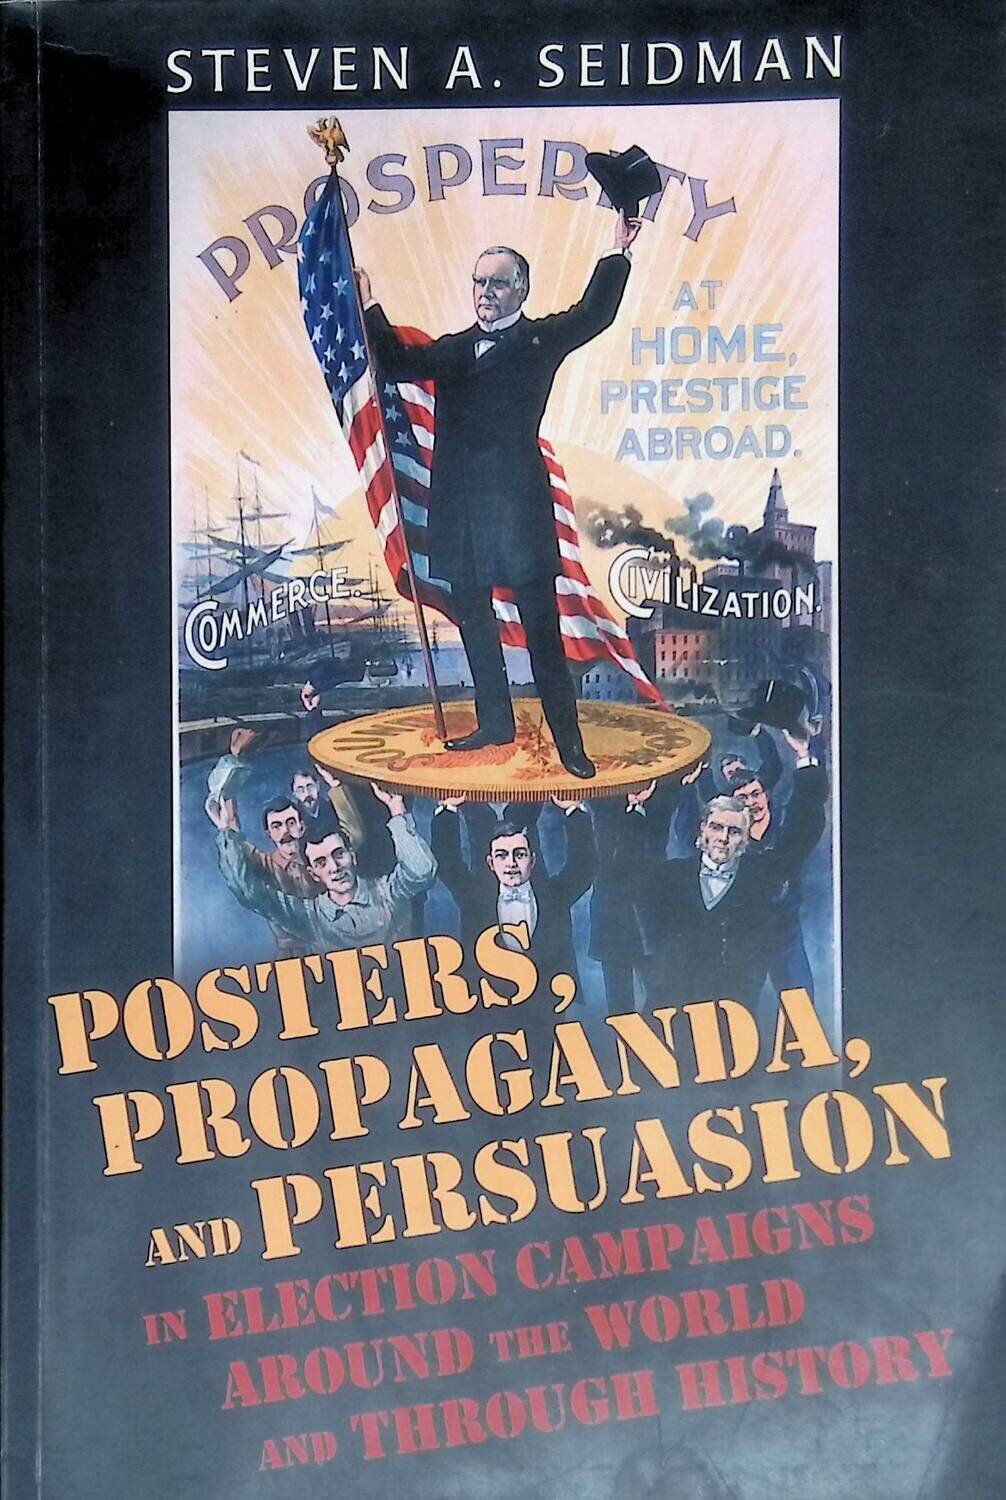 Posters, Propaganda, and Persuasion in Election Campaigns Around the World and Through History by Steven A. Seidman; Steven A. Seidman